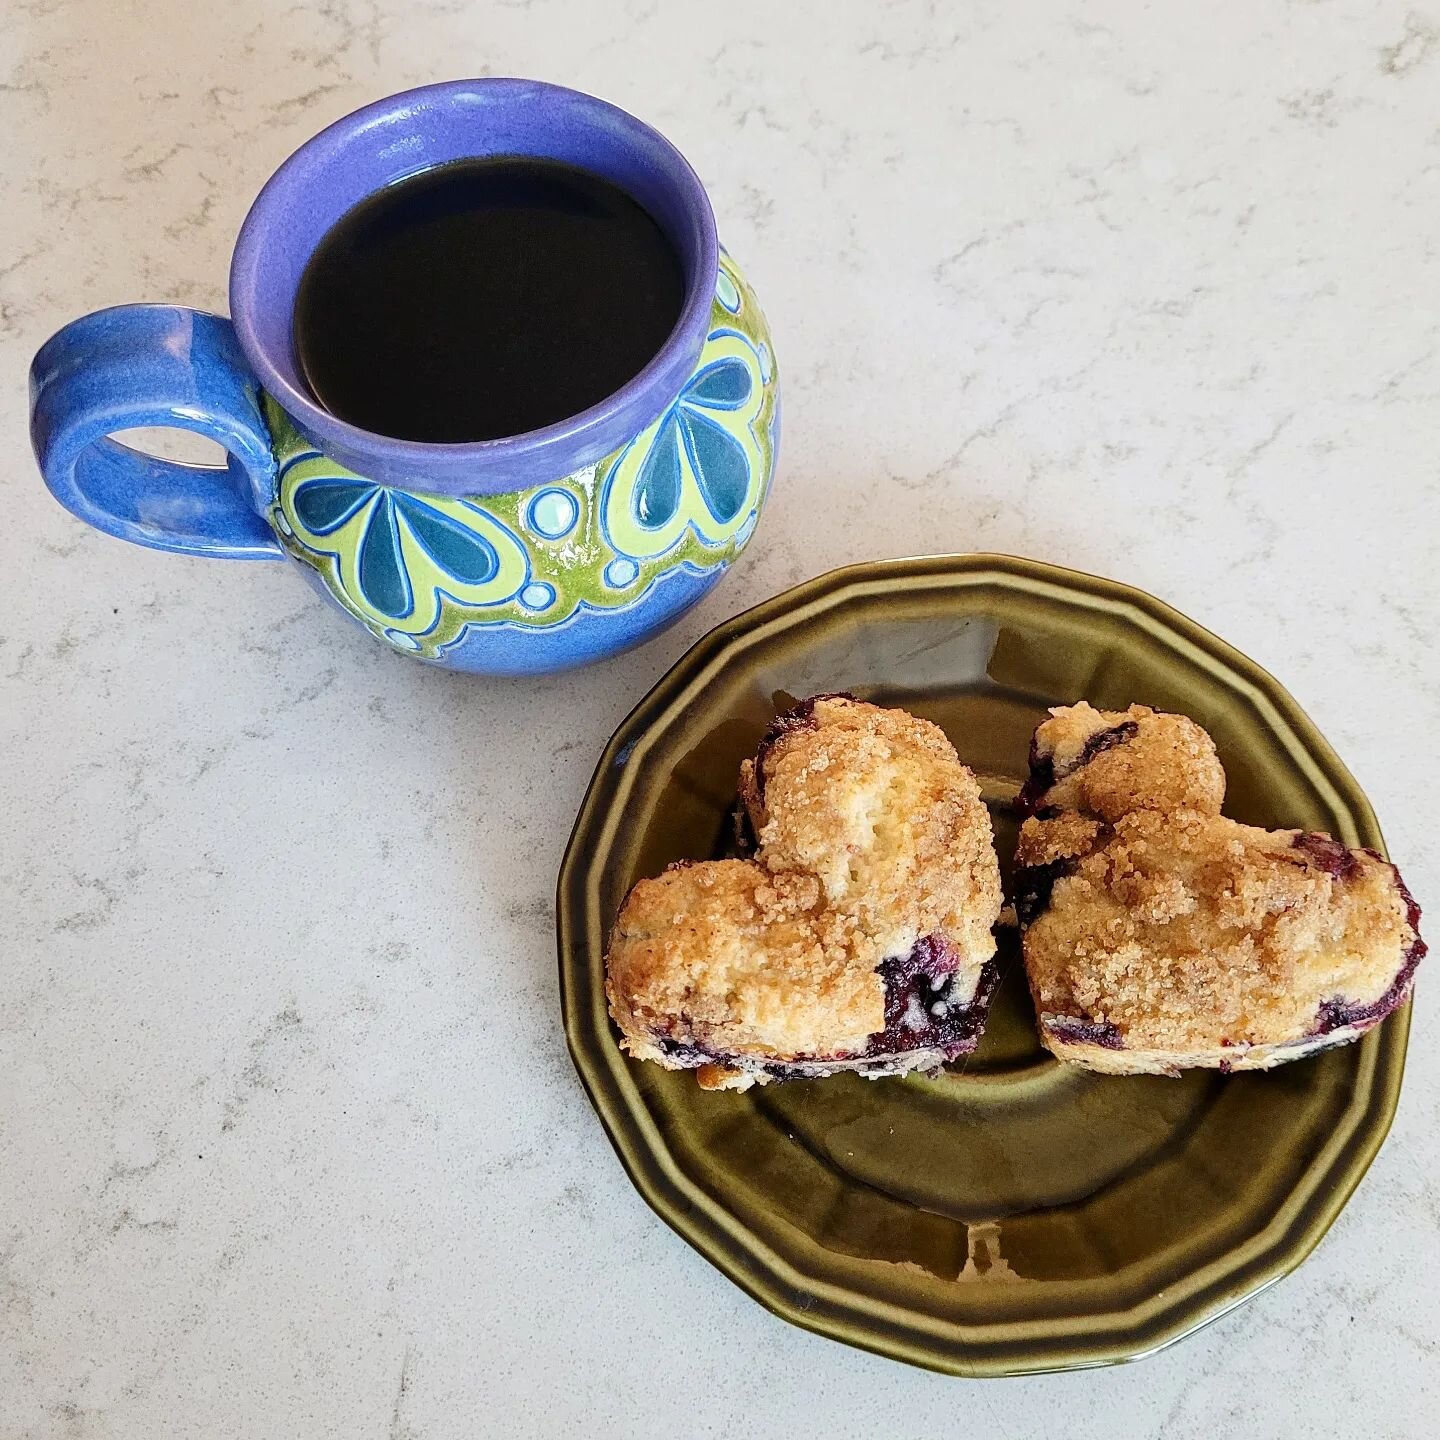 It's a blueberry muffin kind of morning!
🫐
Busted out my favorite heart shaped pans and my favorite recipe (both from my sweet Momma) and made the start to this day extra special! There's something I love so much about breakfast. Do you have any mor